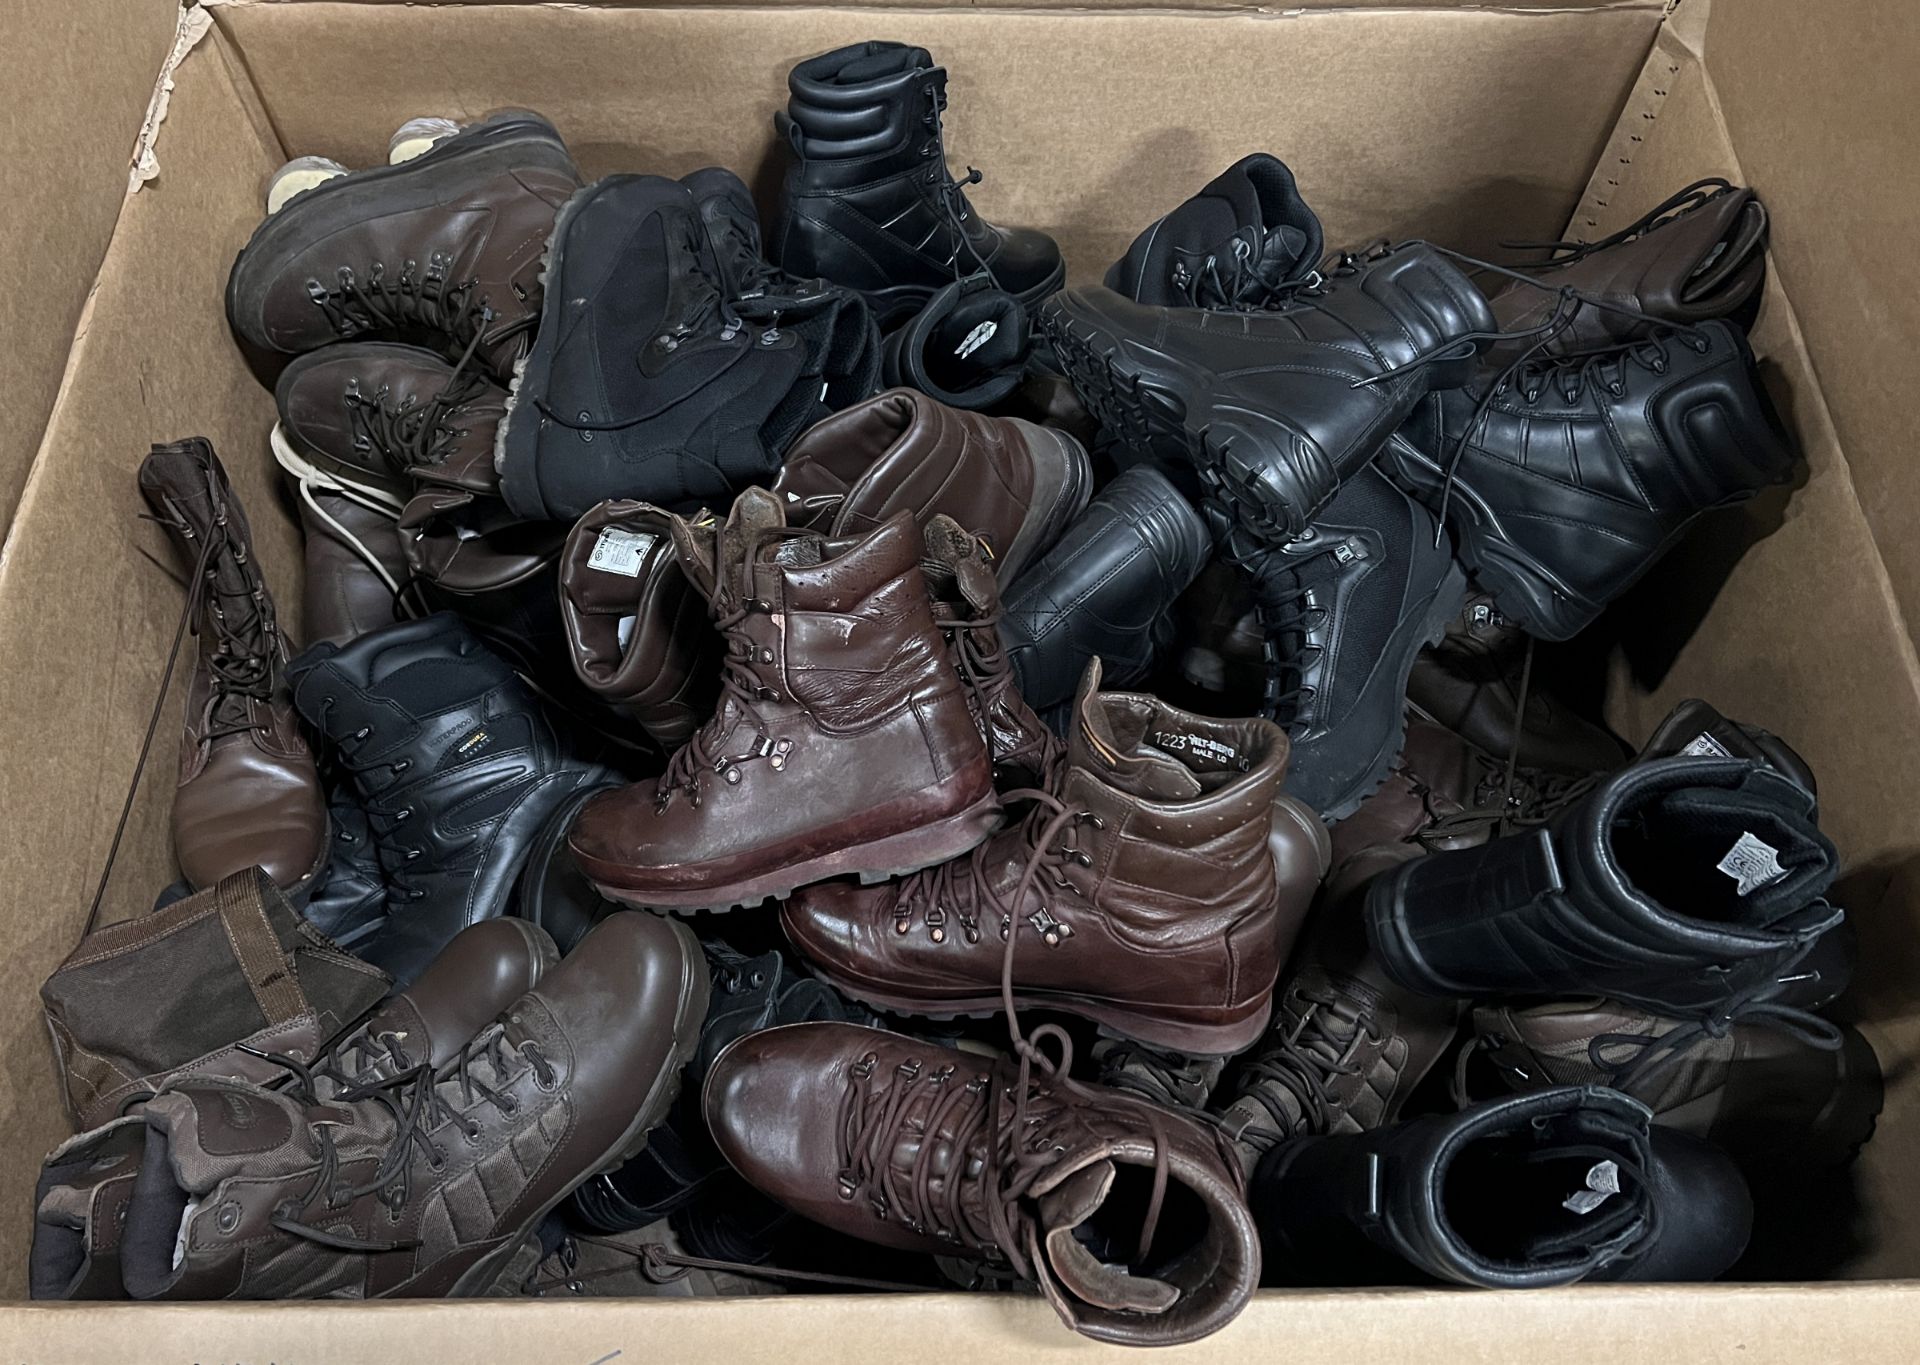 Various boots - Magnum, Haix, YDS - mixed sizes - approx. 50 pairs